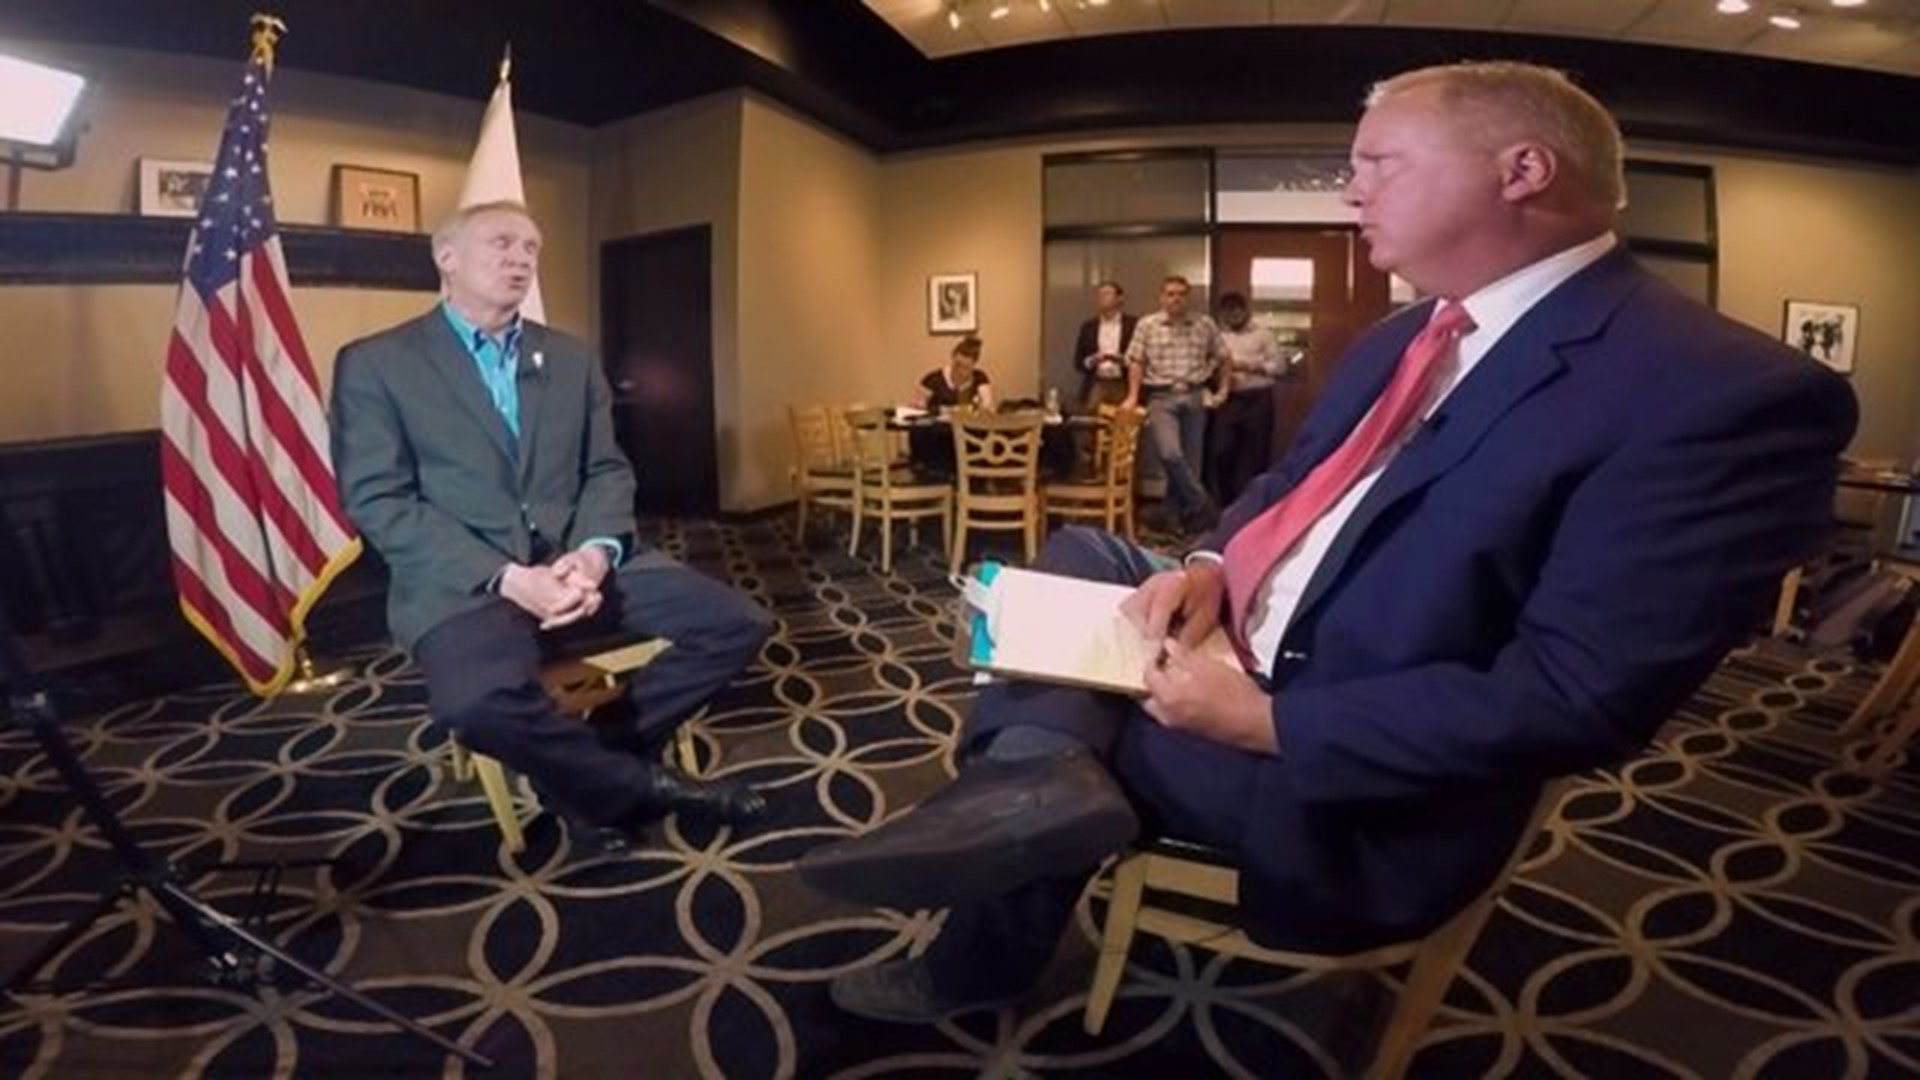 Governor Rauner One on One with Jim Mertens